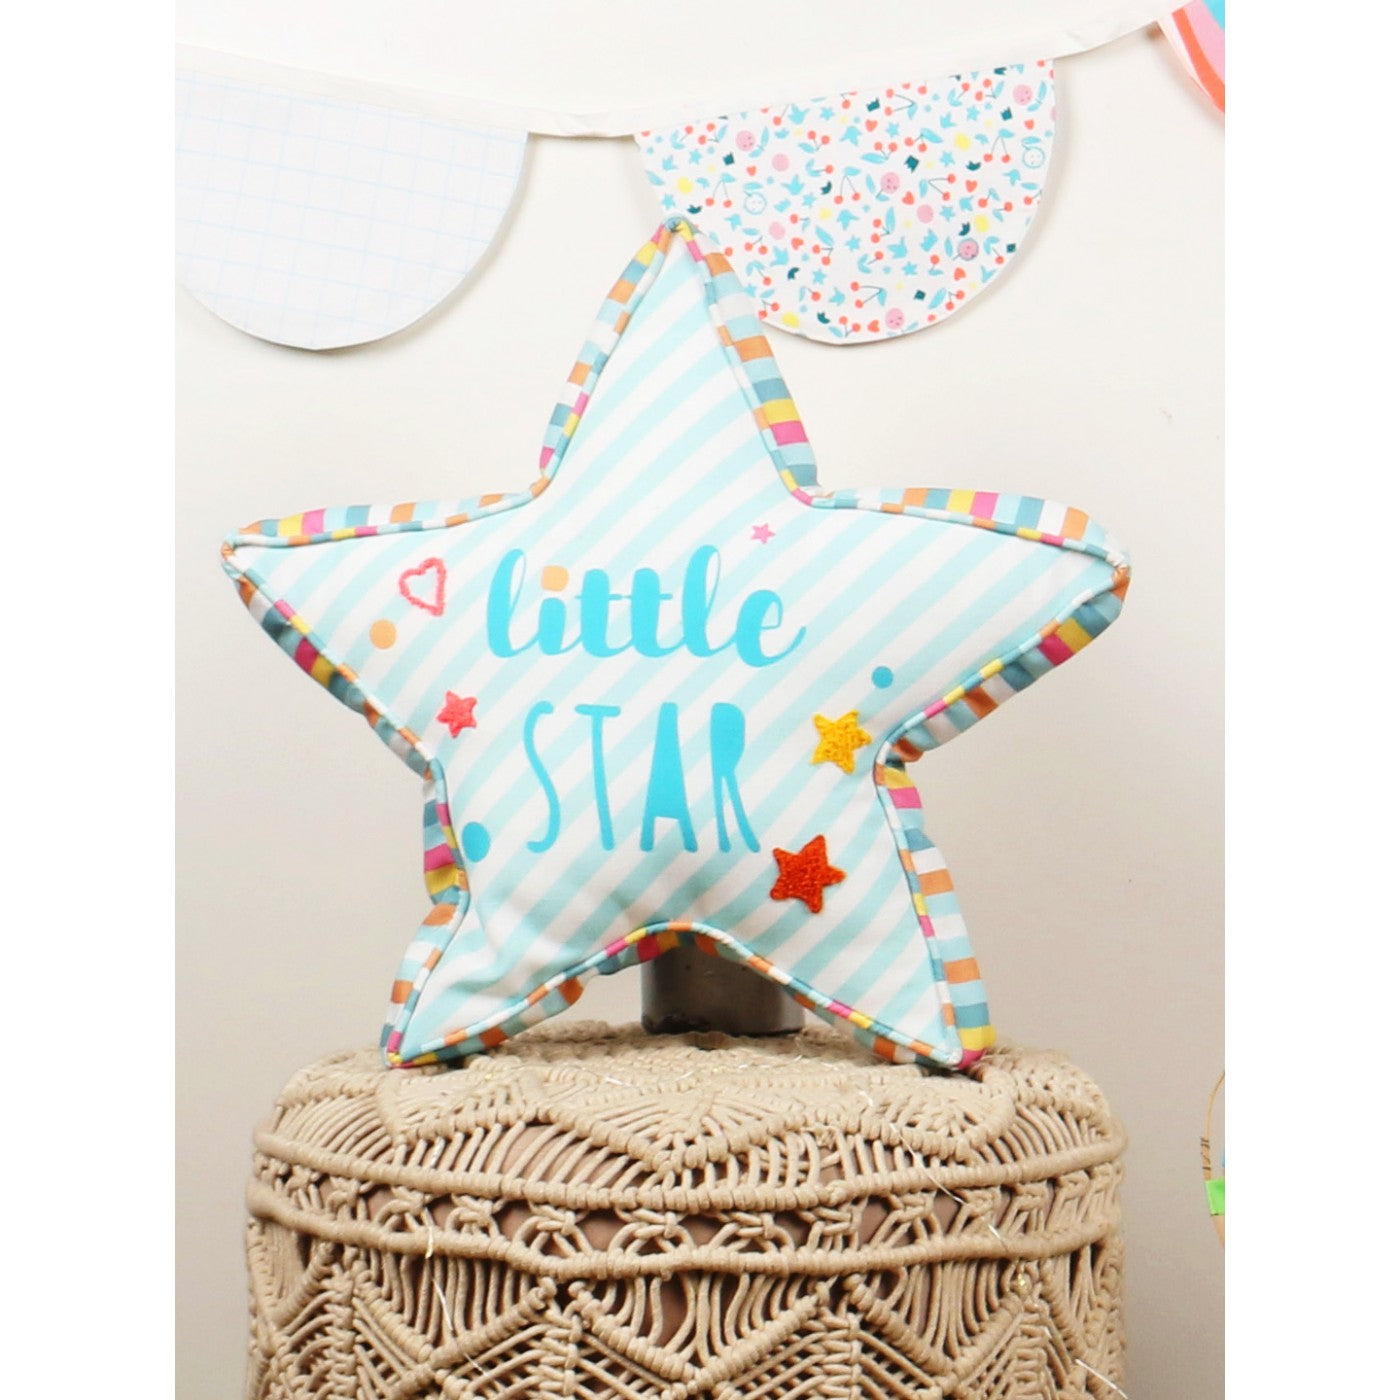 Starry Embrace: Star-Shaped Cushion with Digital Print